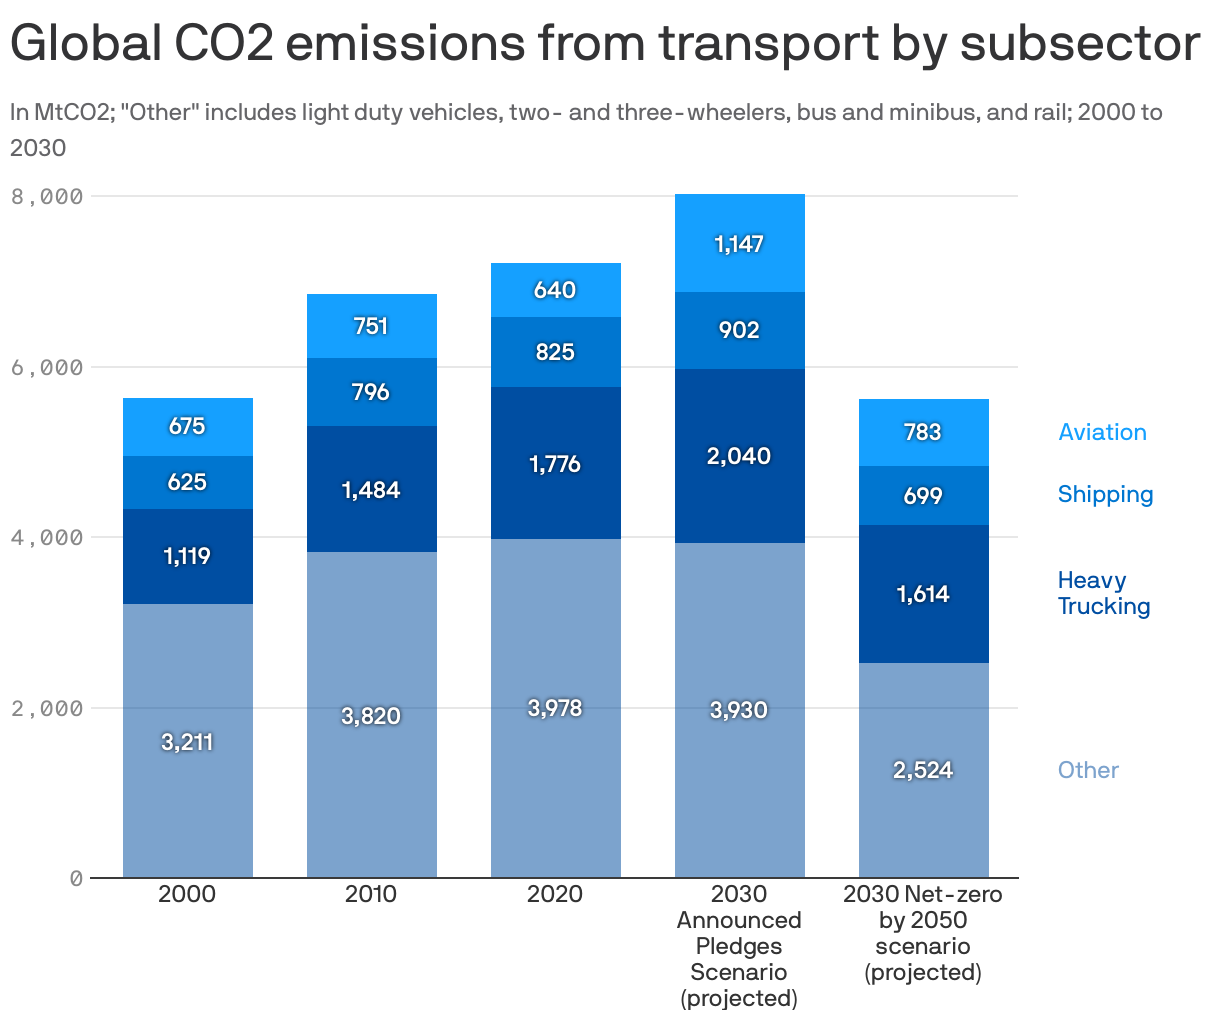 Global CO2 emissions from transport by subsector